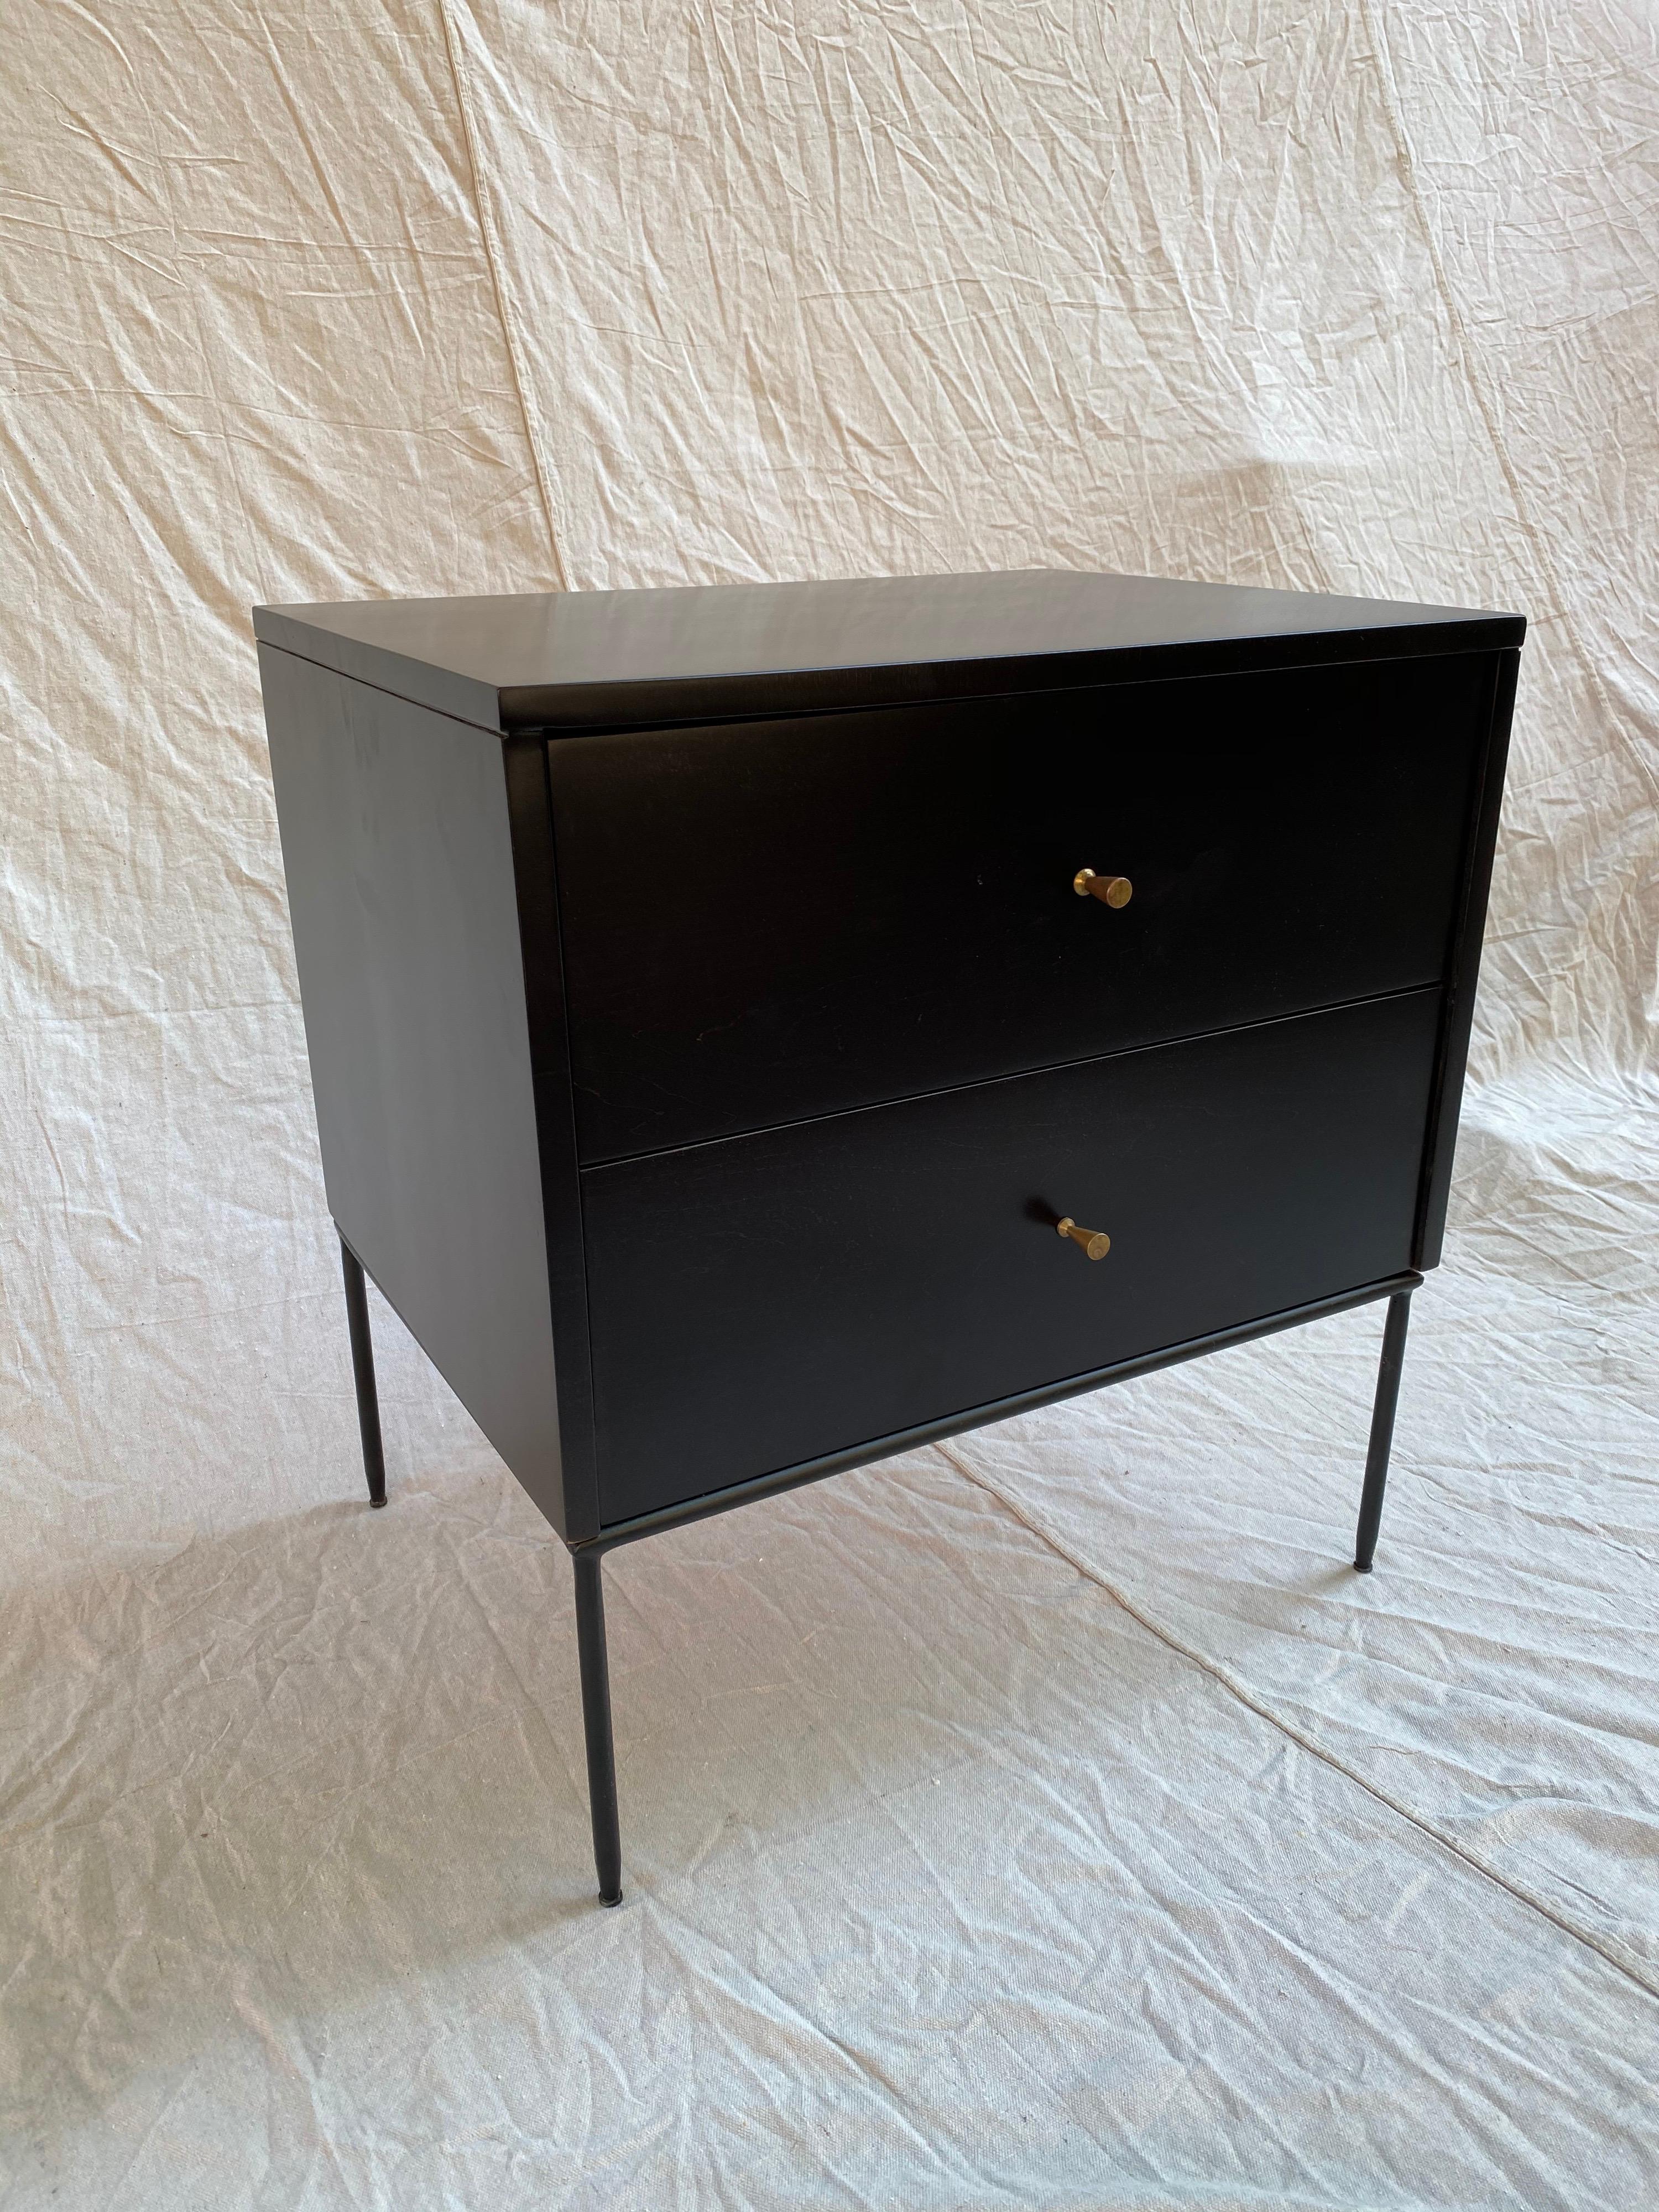 Paul McCobb 2 drawer cabinet on metal base. Newly refinished in a satin black finish. Brass cone handles are currently on the cabinet. I have vintage aluminum rings and vintage 